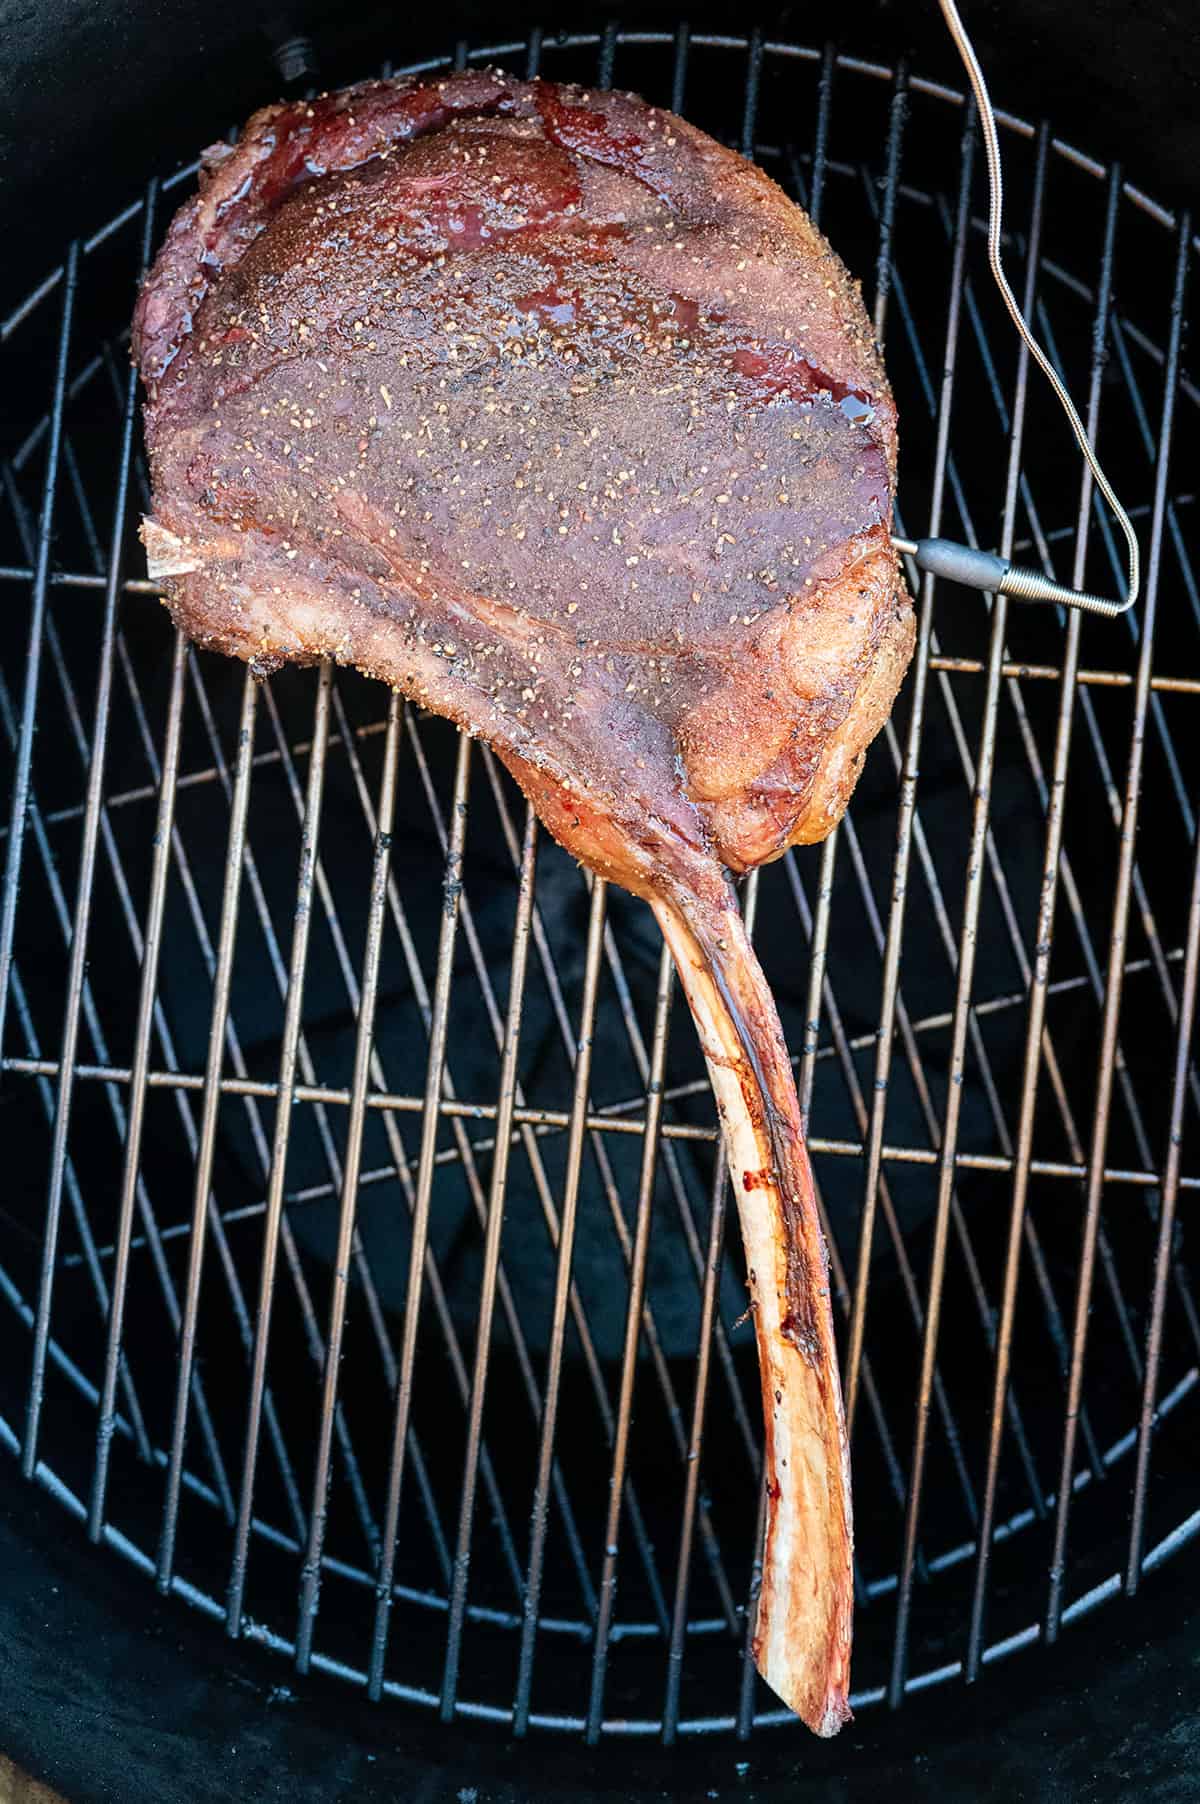 Tomahawk steak on grill once it's reached 110F.